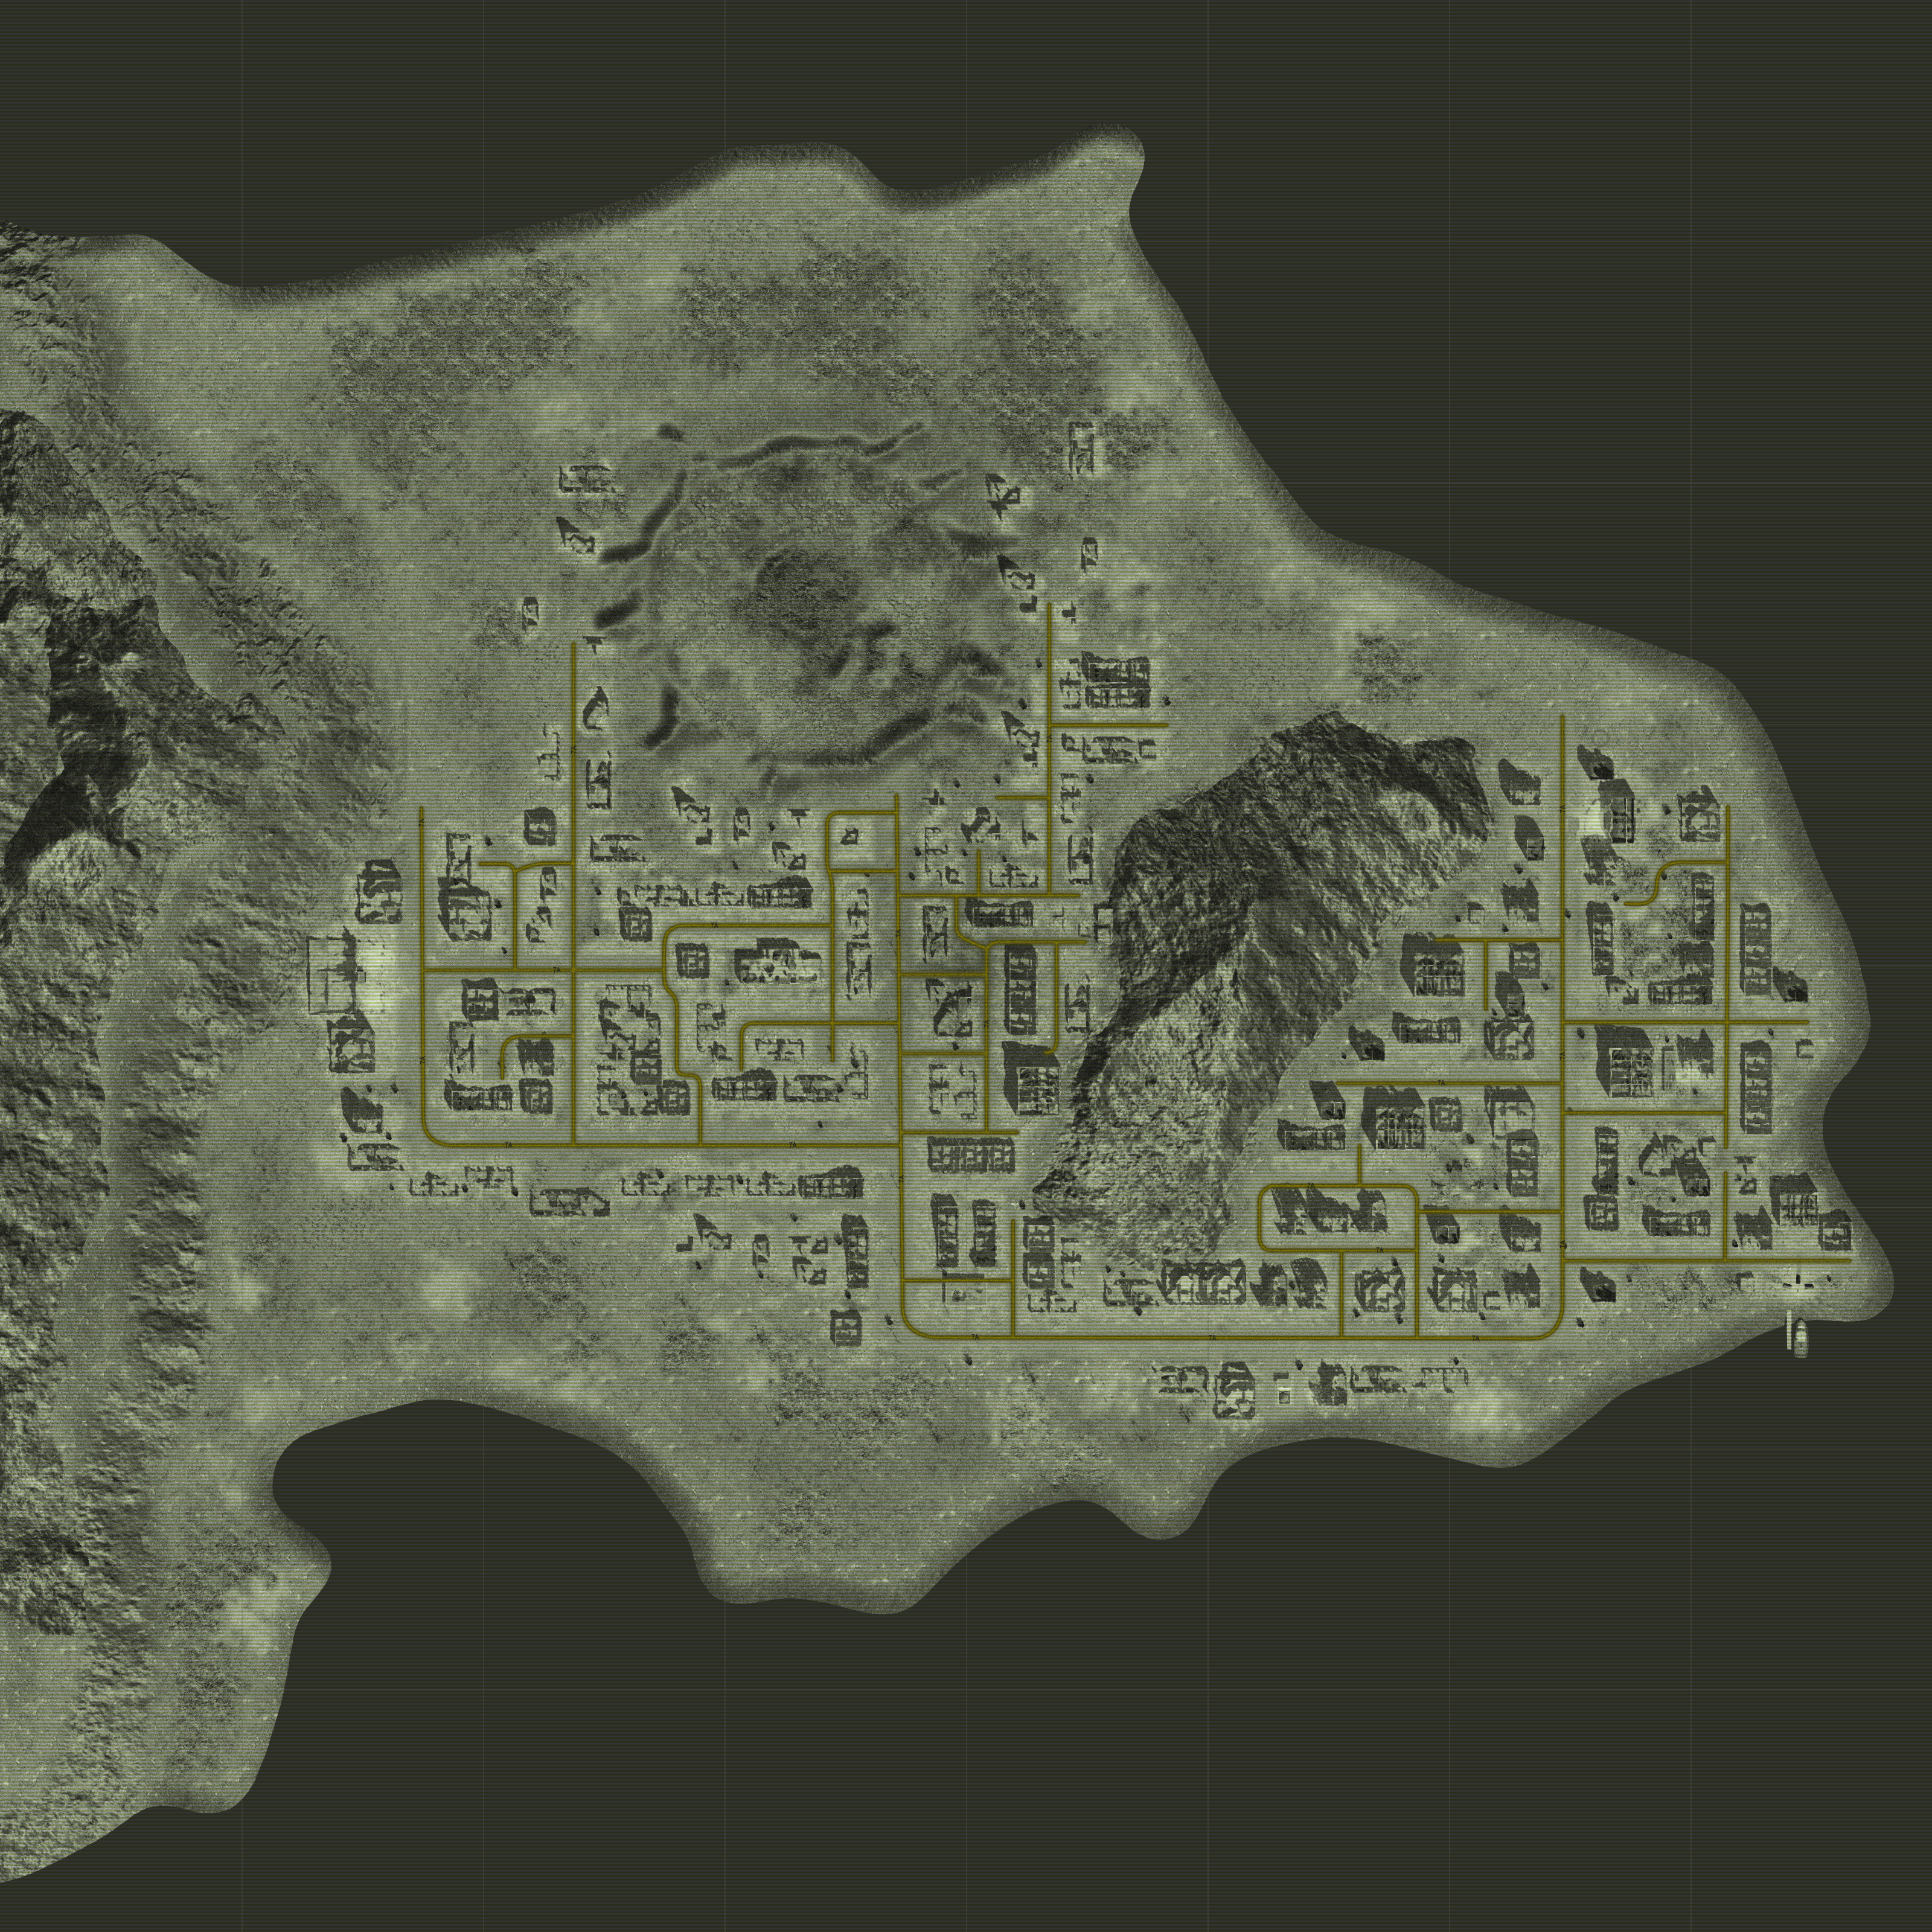 ATOM RPG: Post-apocalyptic indie game - World Map - Dead City